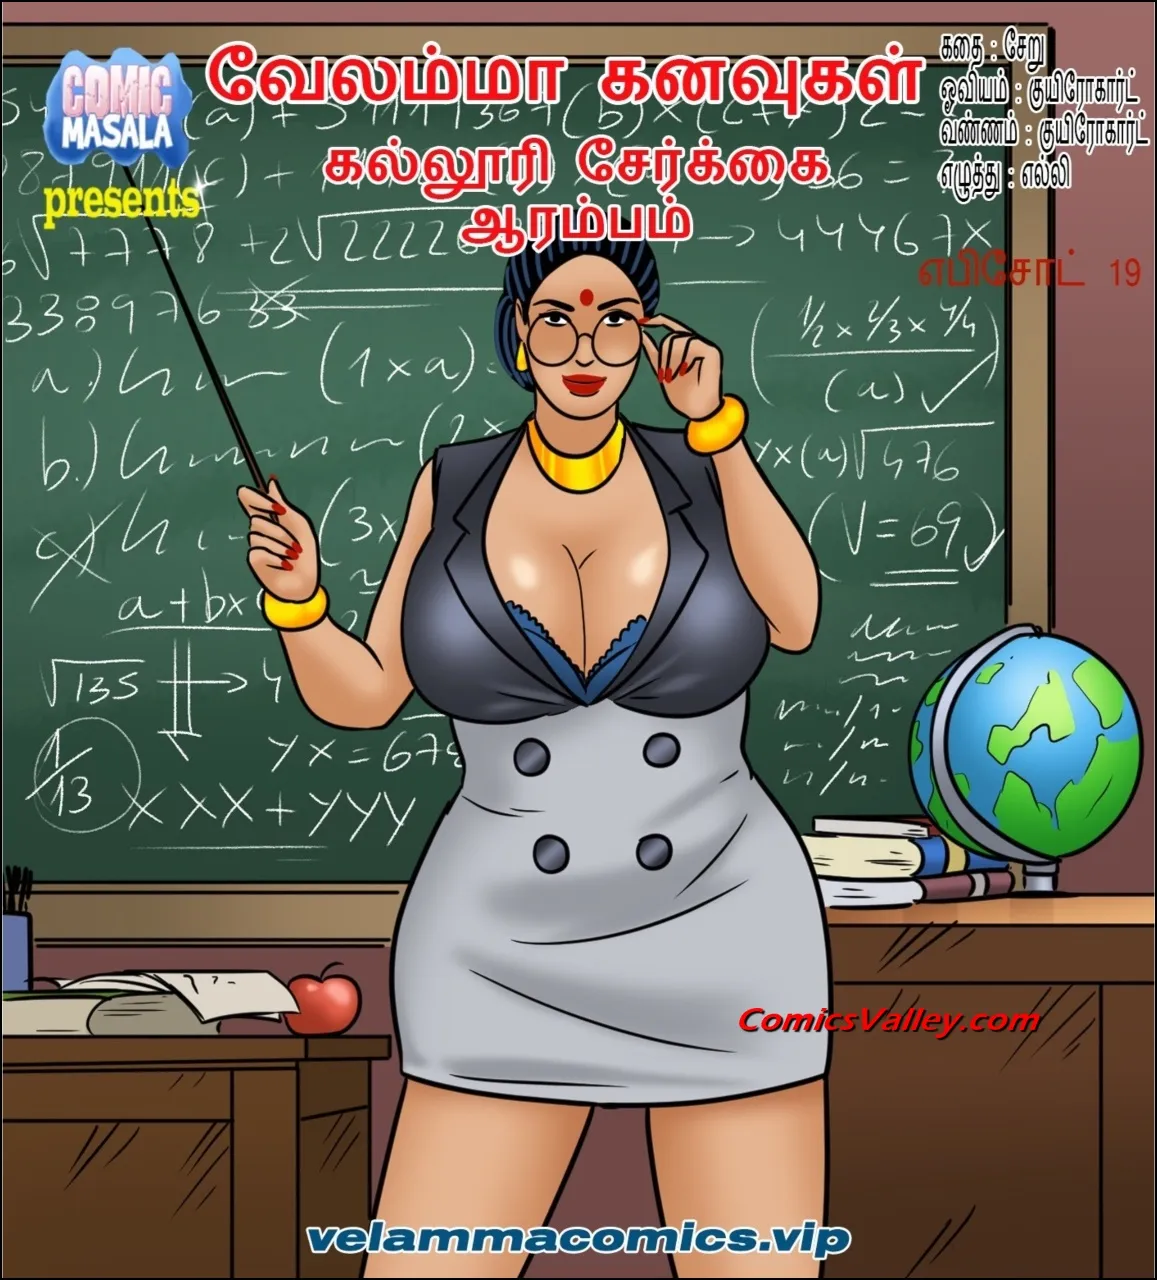 Porncomics In Tamil - Porn comics in tamil with pictures - Anime15